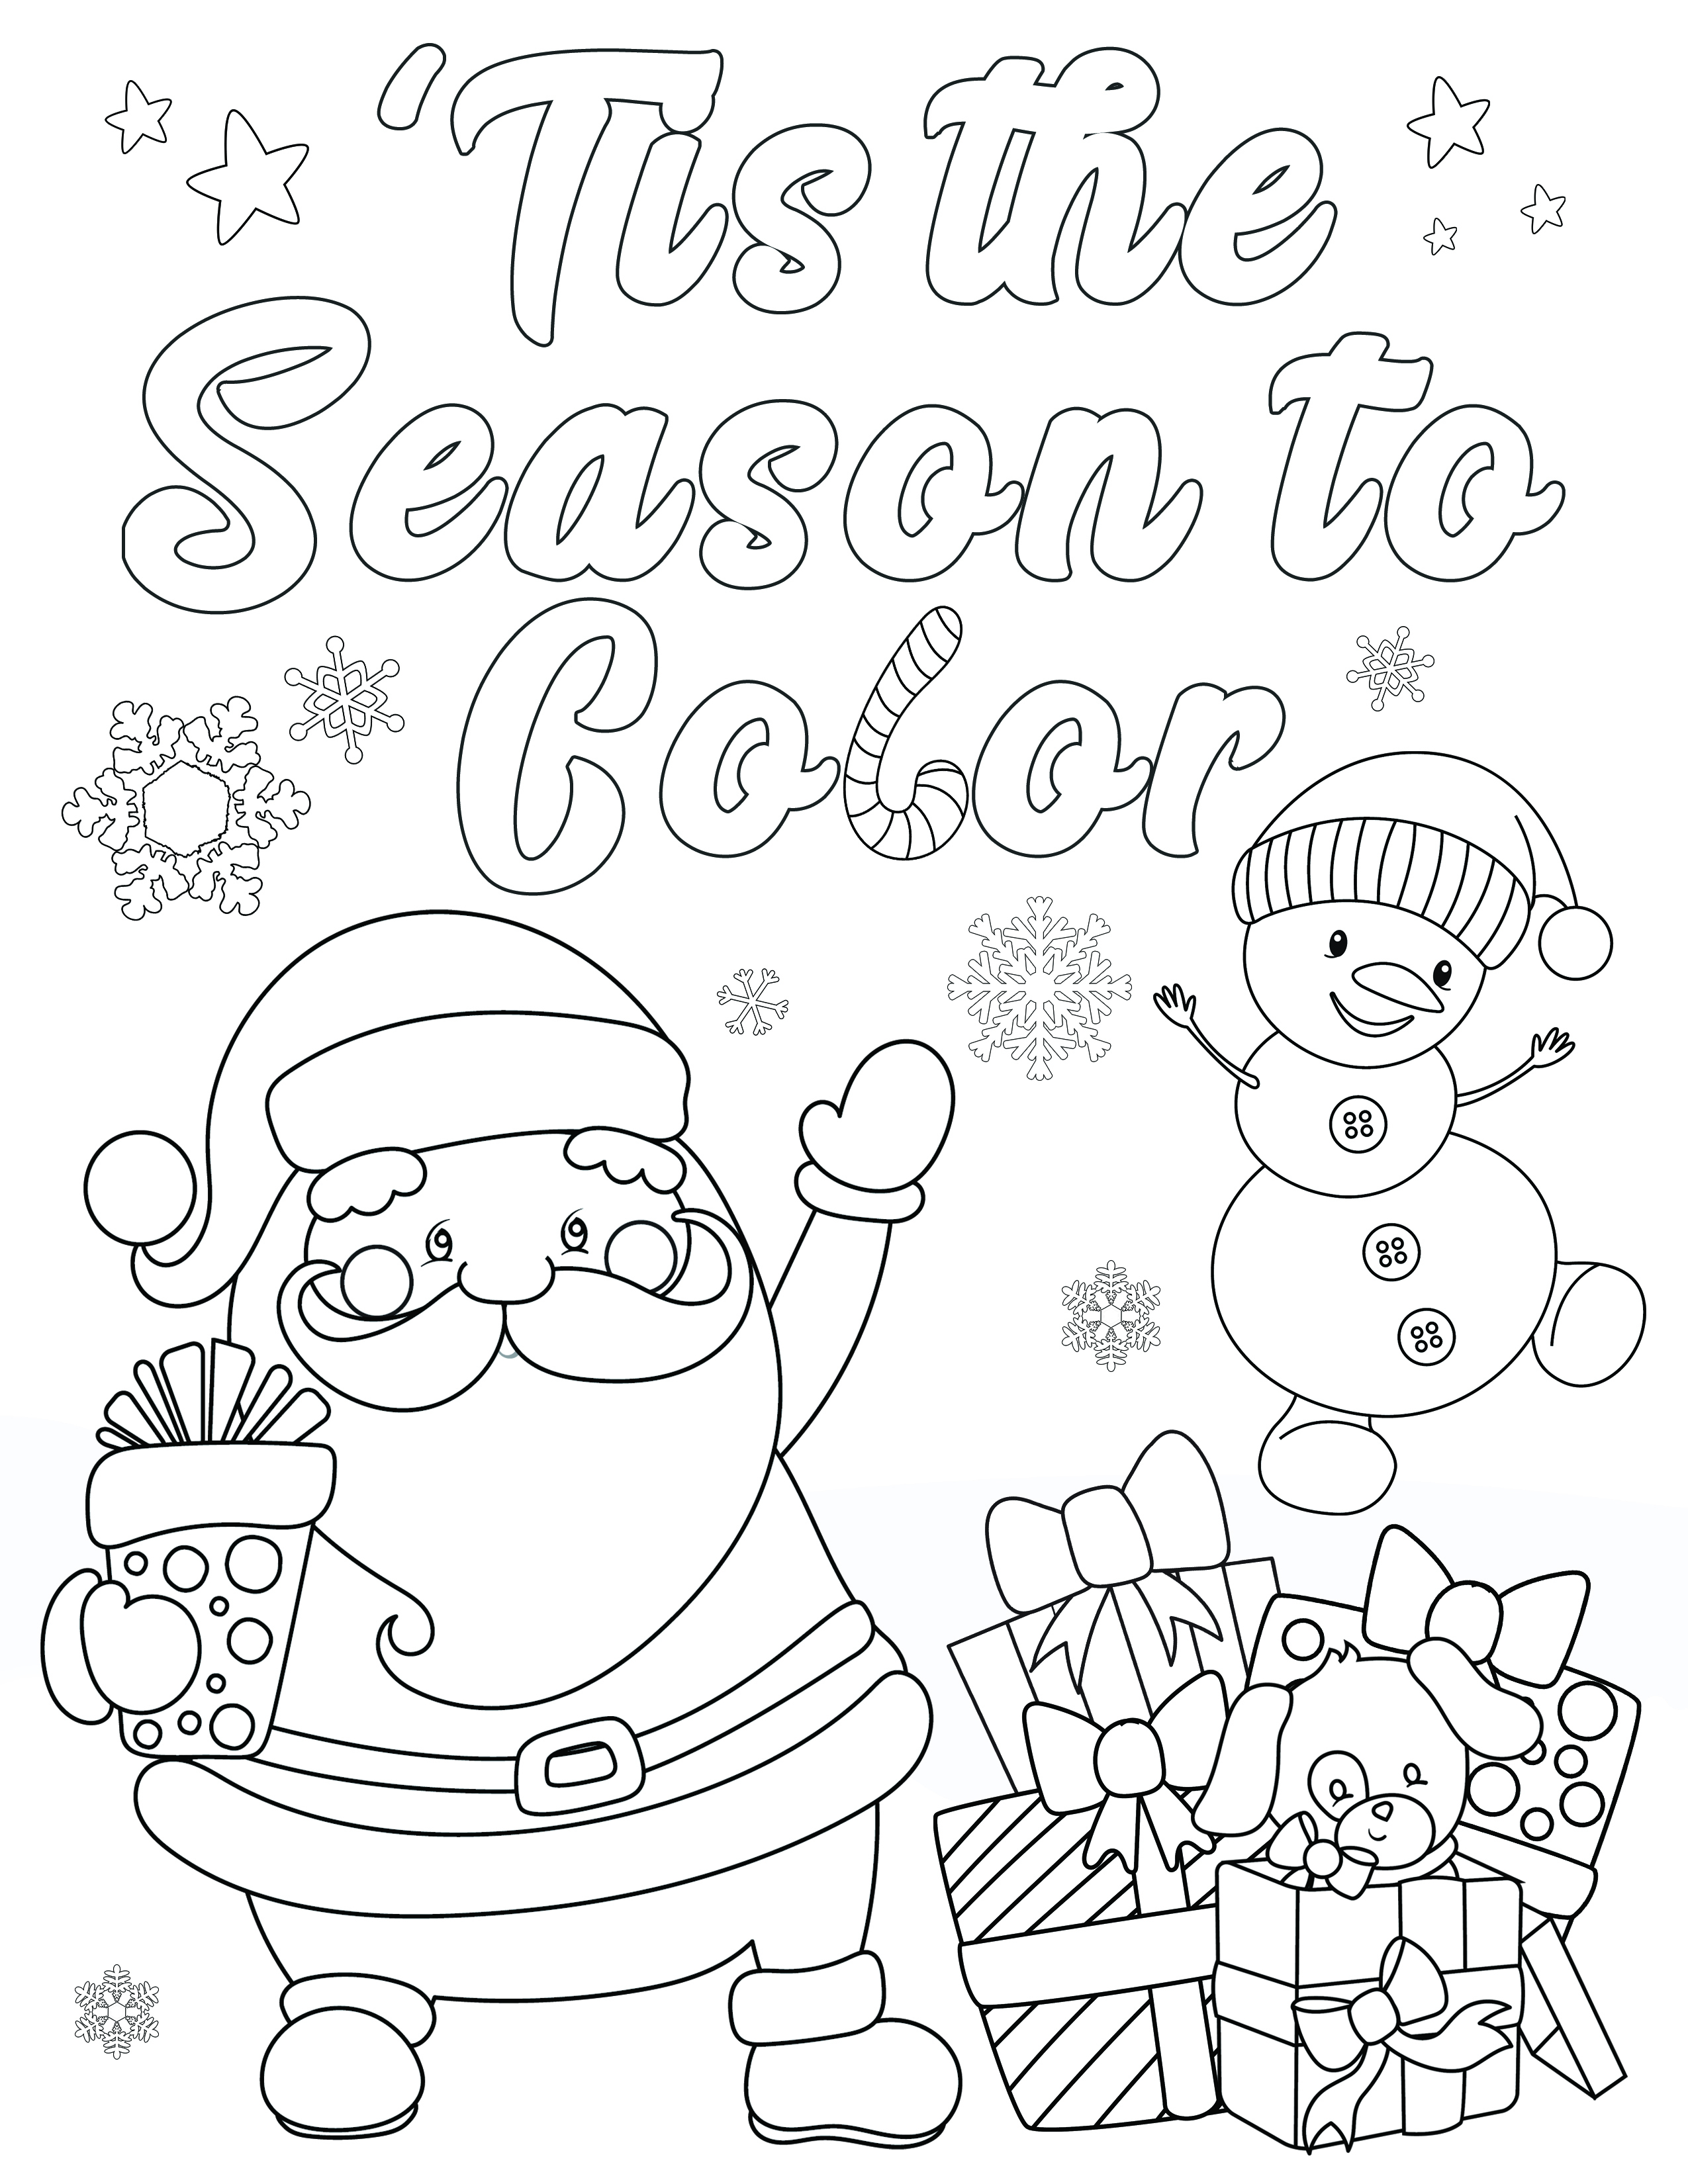 Coloring Pages Santa Free Christmas Coloring Pages For Adults And Kids Happiness Is